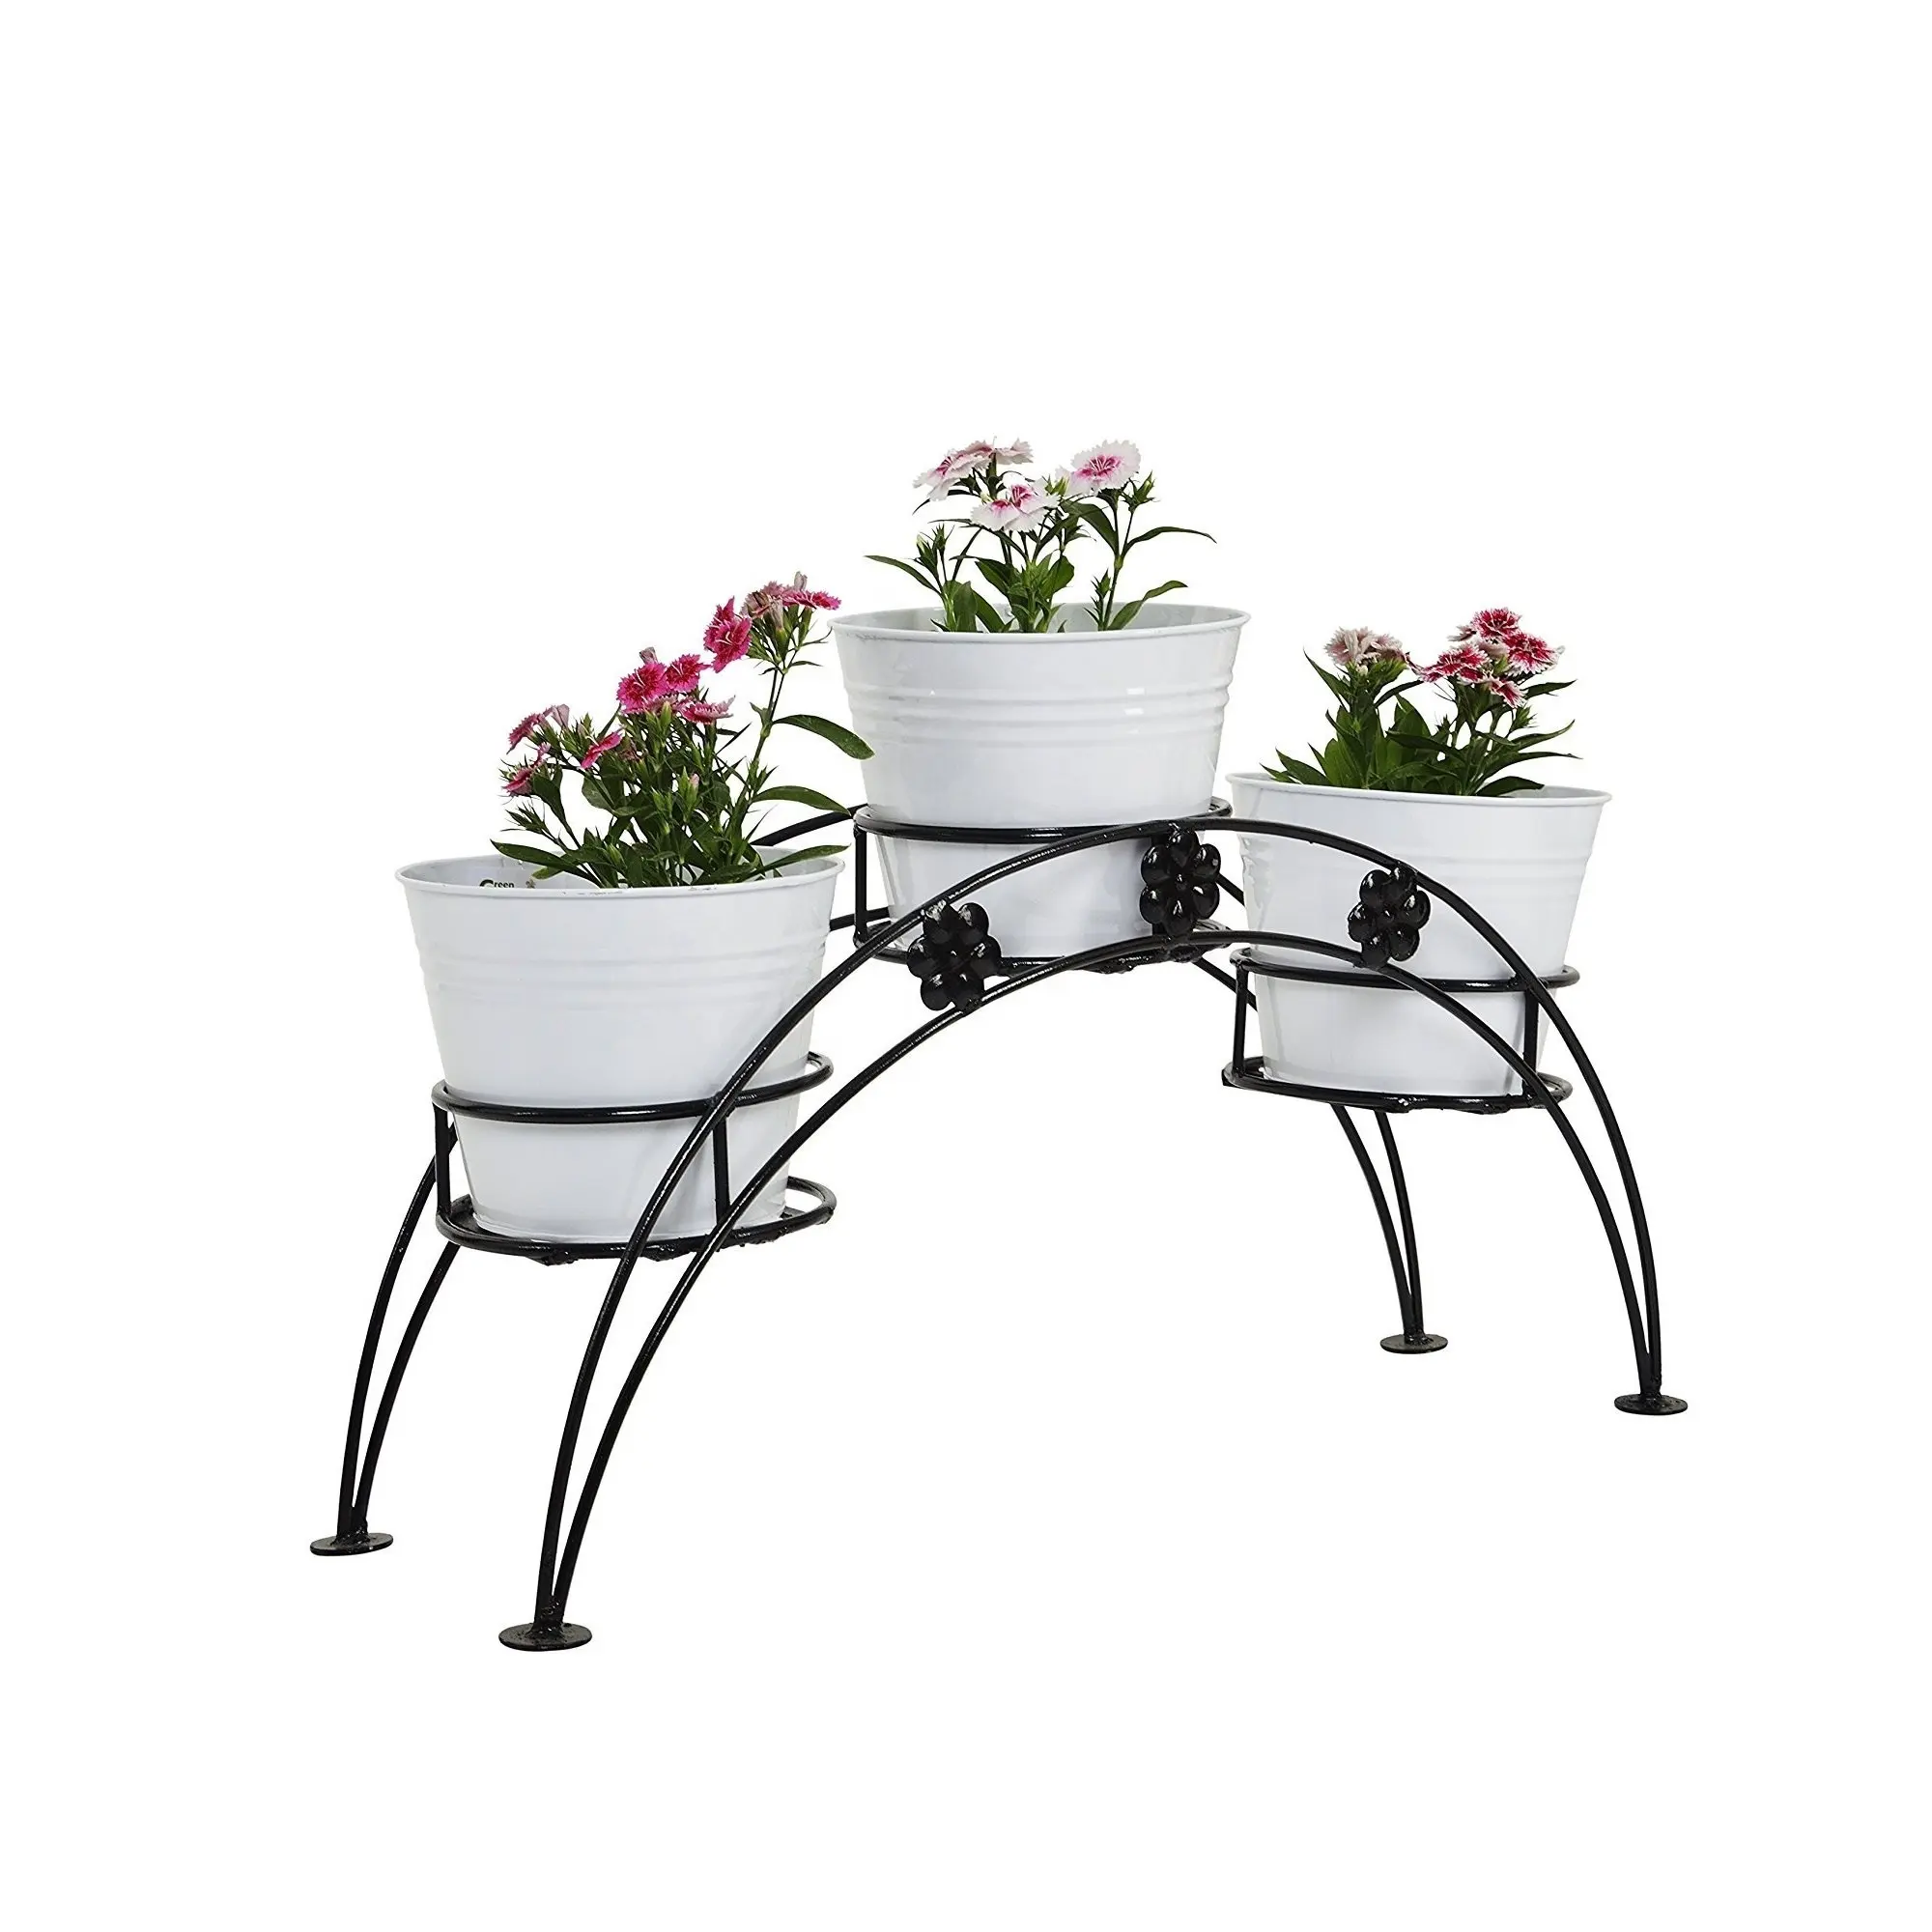 Iron 3 Tier Pot Stand With Metal Planter White Heavy Duty Highly Durable Floor Pot for Living Room, Indoor and Outdoor, Balcony,